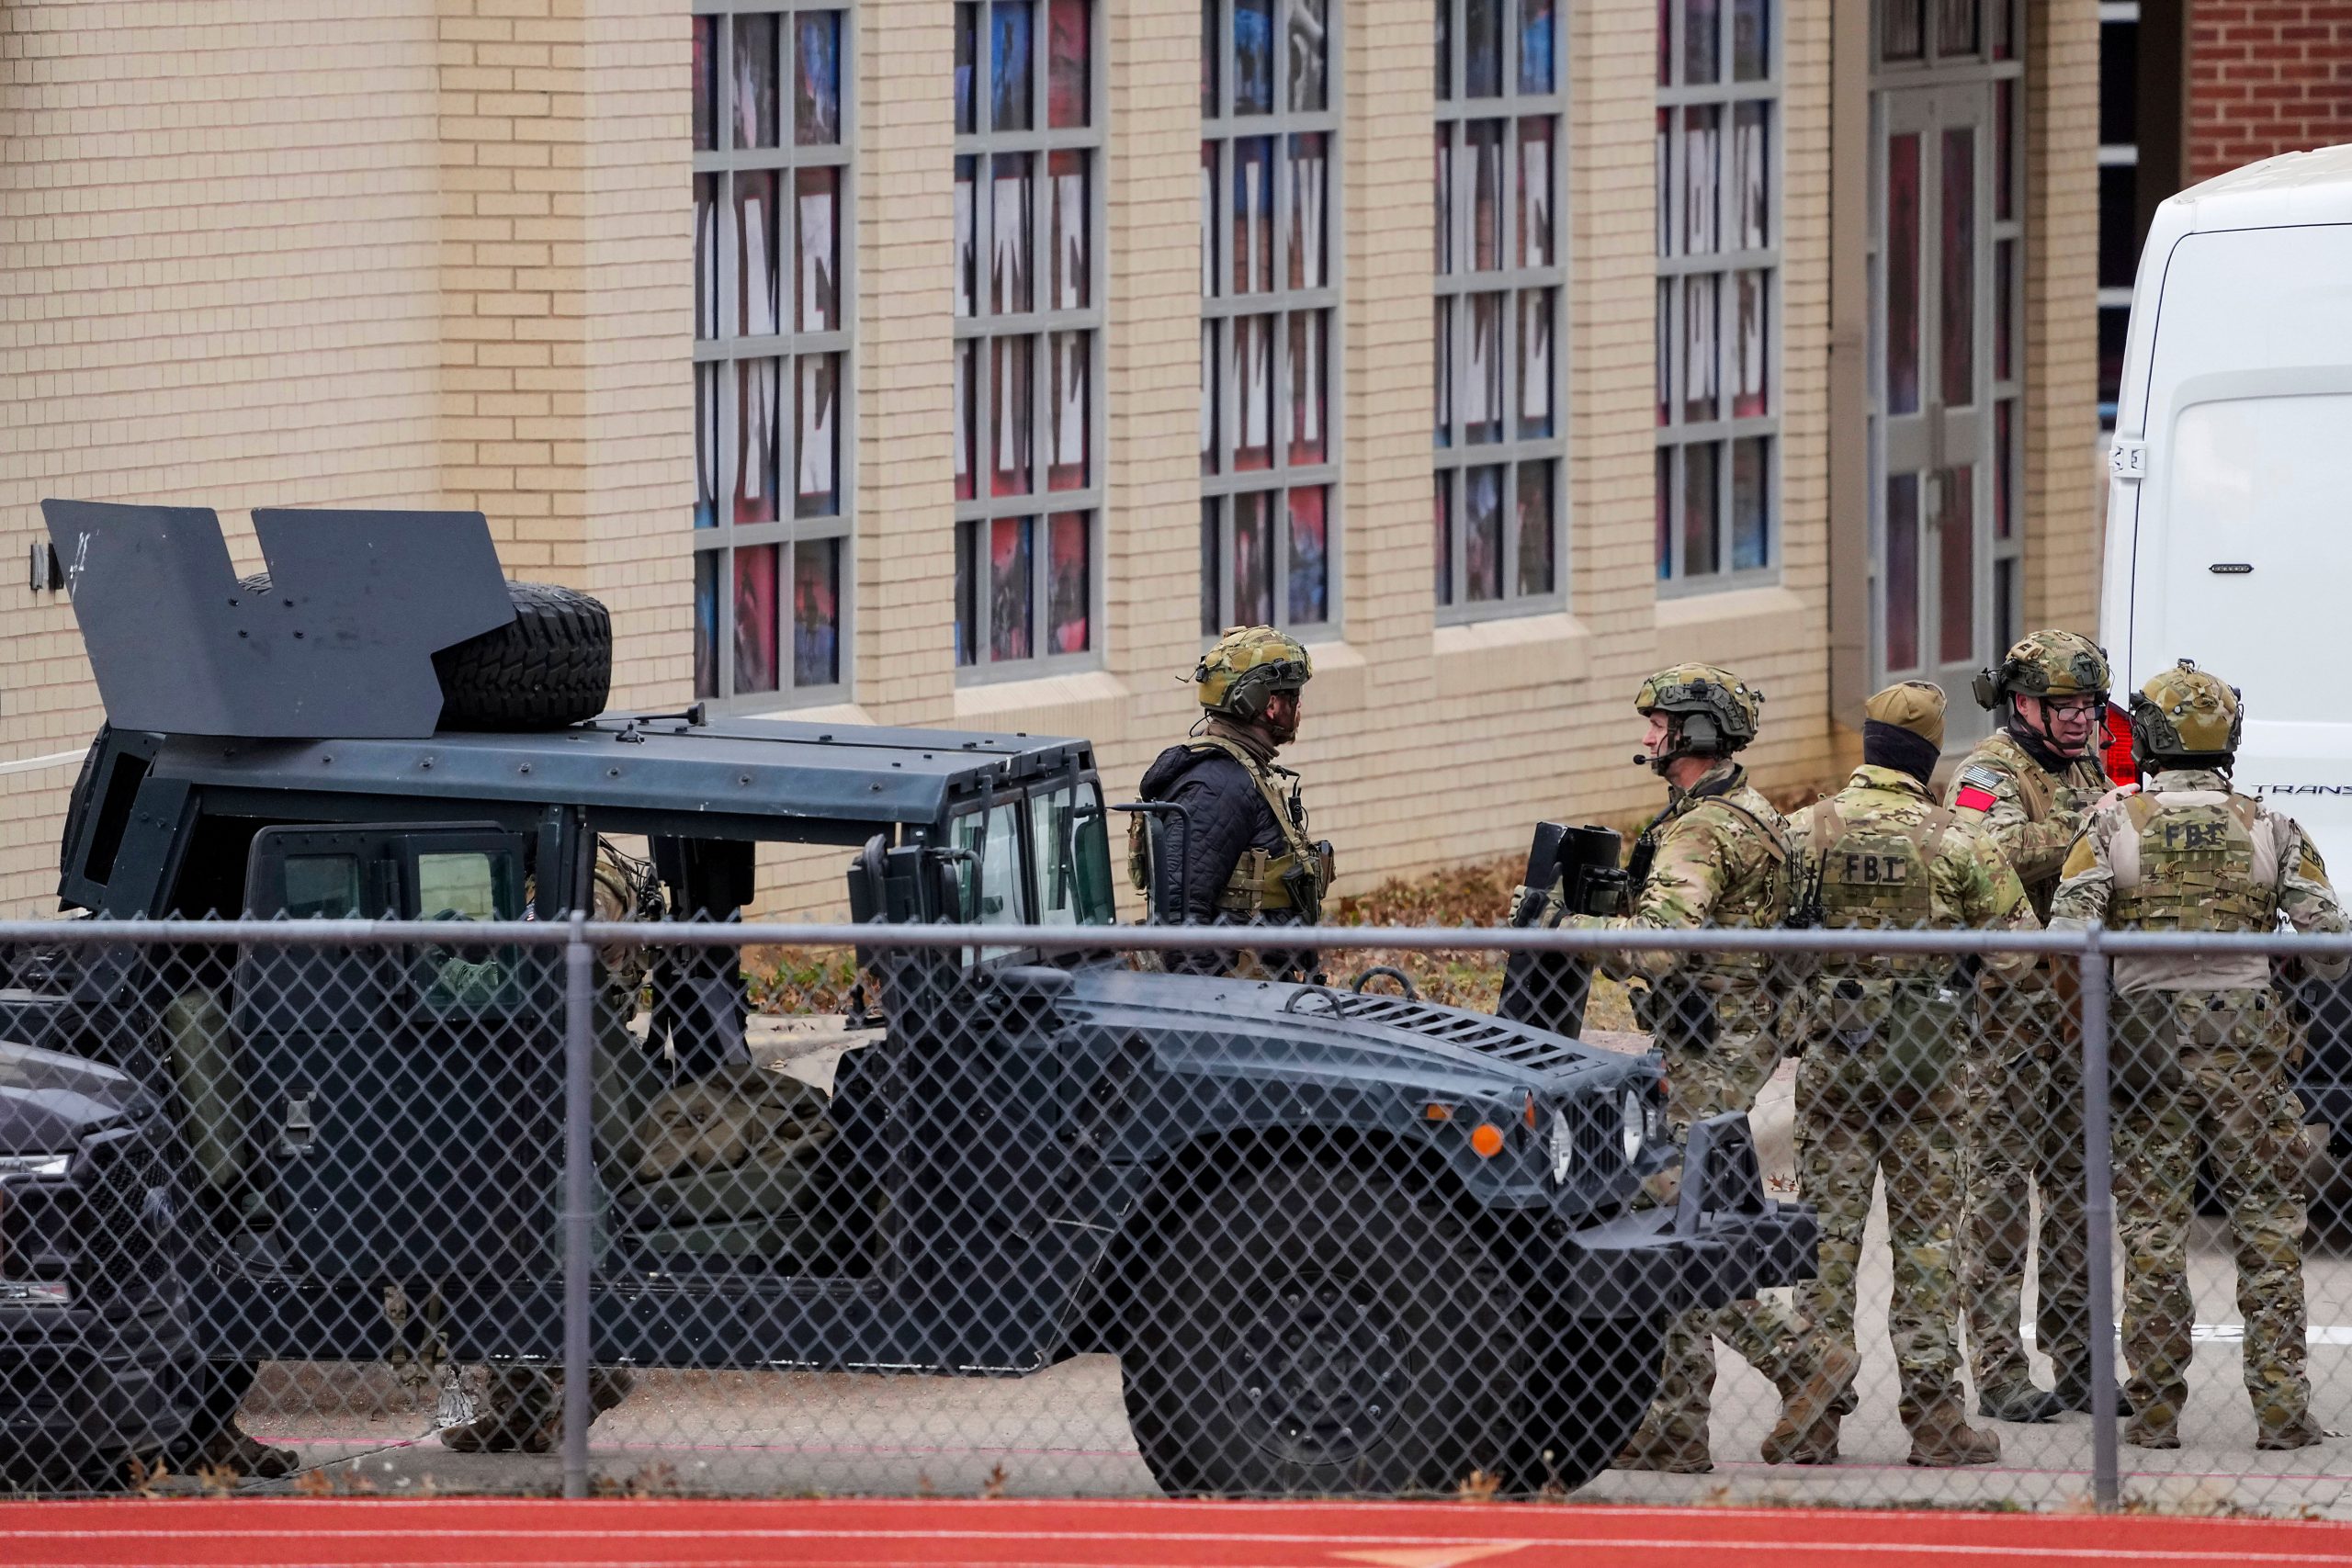 Texas synagogue hostage-taker was British: Reports